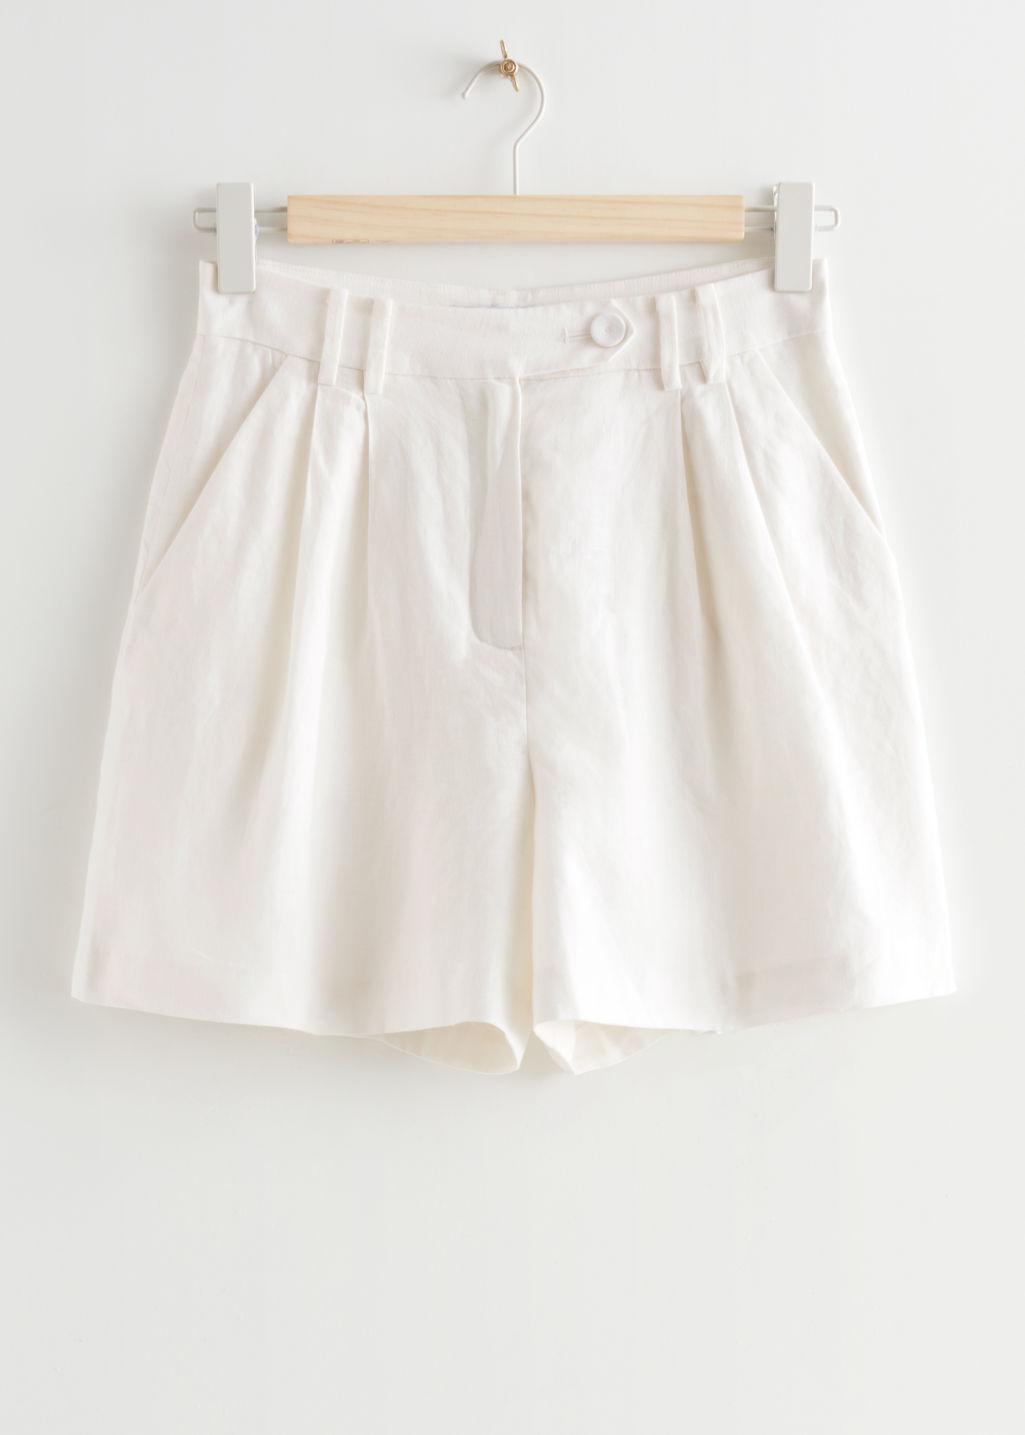 & Other Stories Relaxed Linen Shorts in White | Lyst